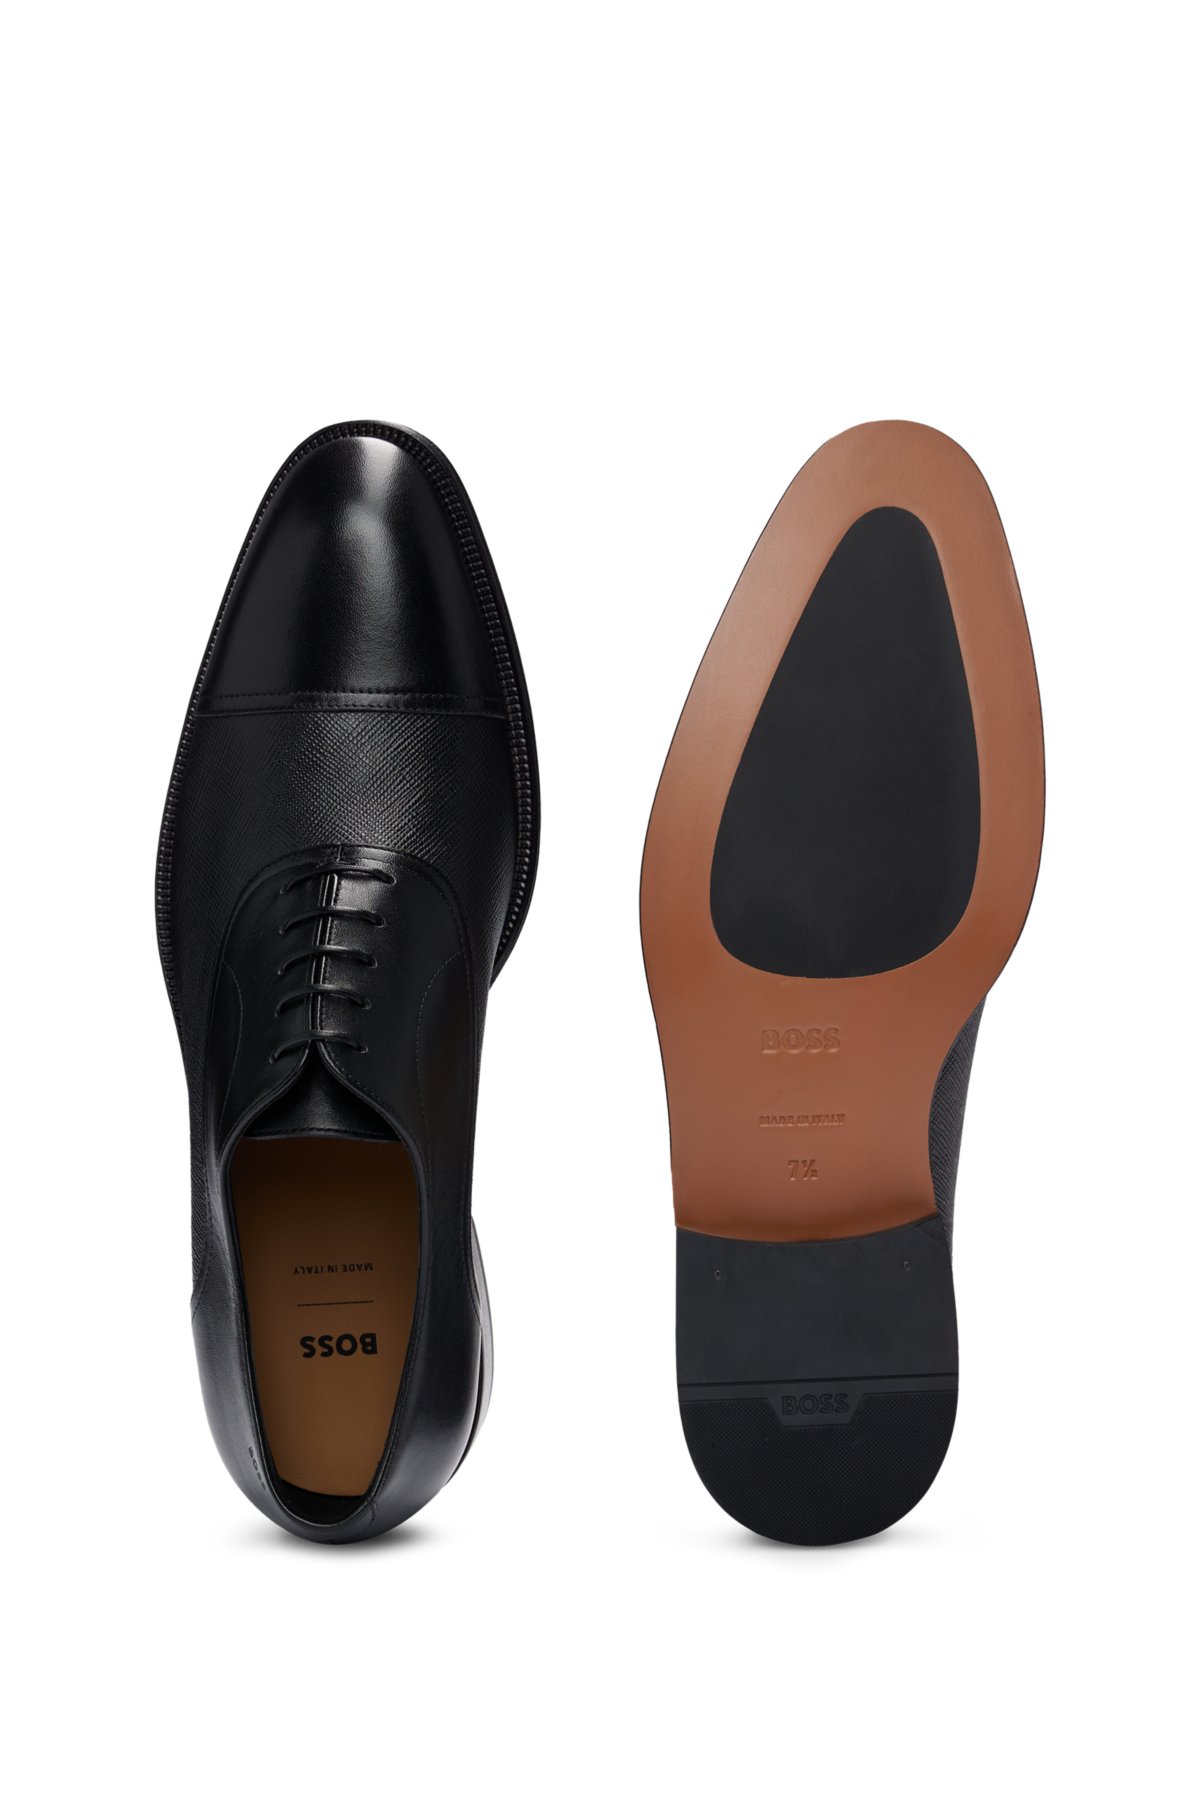 Hugo Boss Italy Mens Dress Shoes Size 10 Black Leather Derby Oxford for  sale online